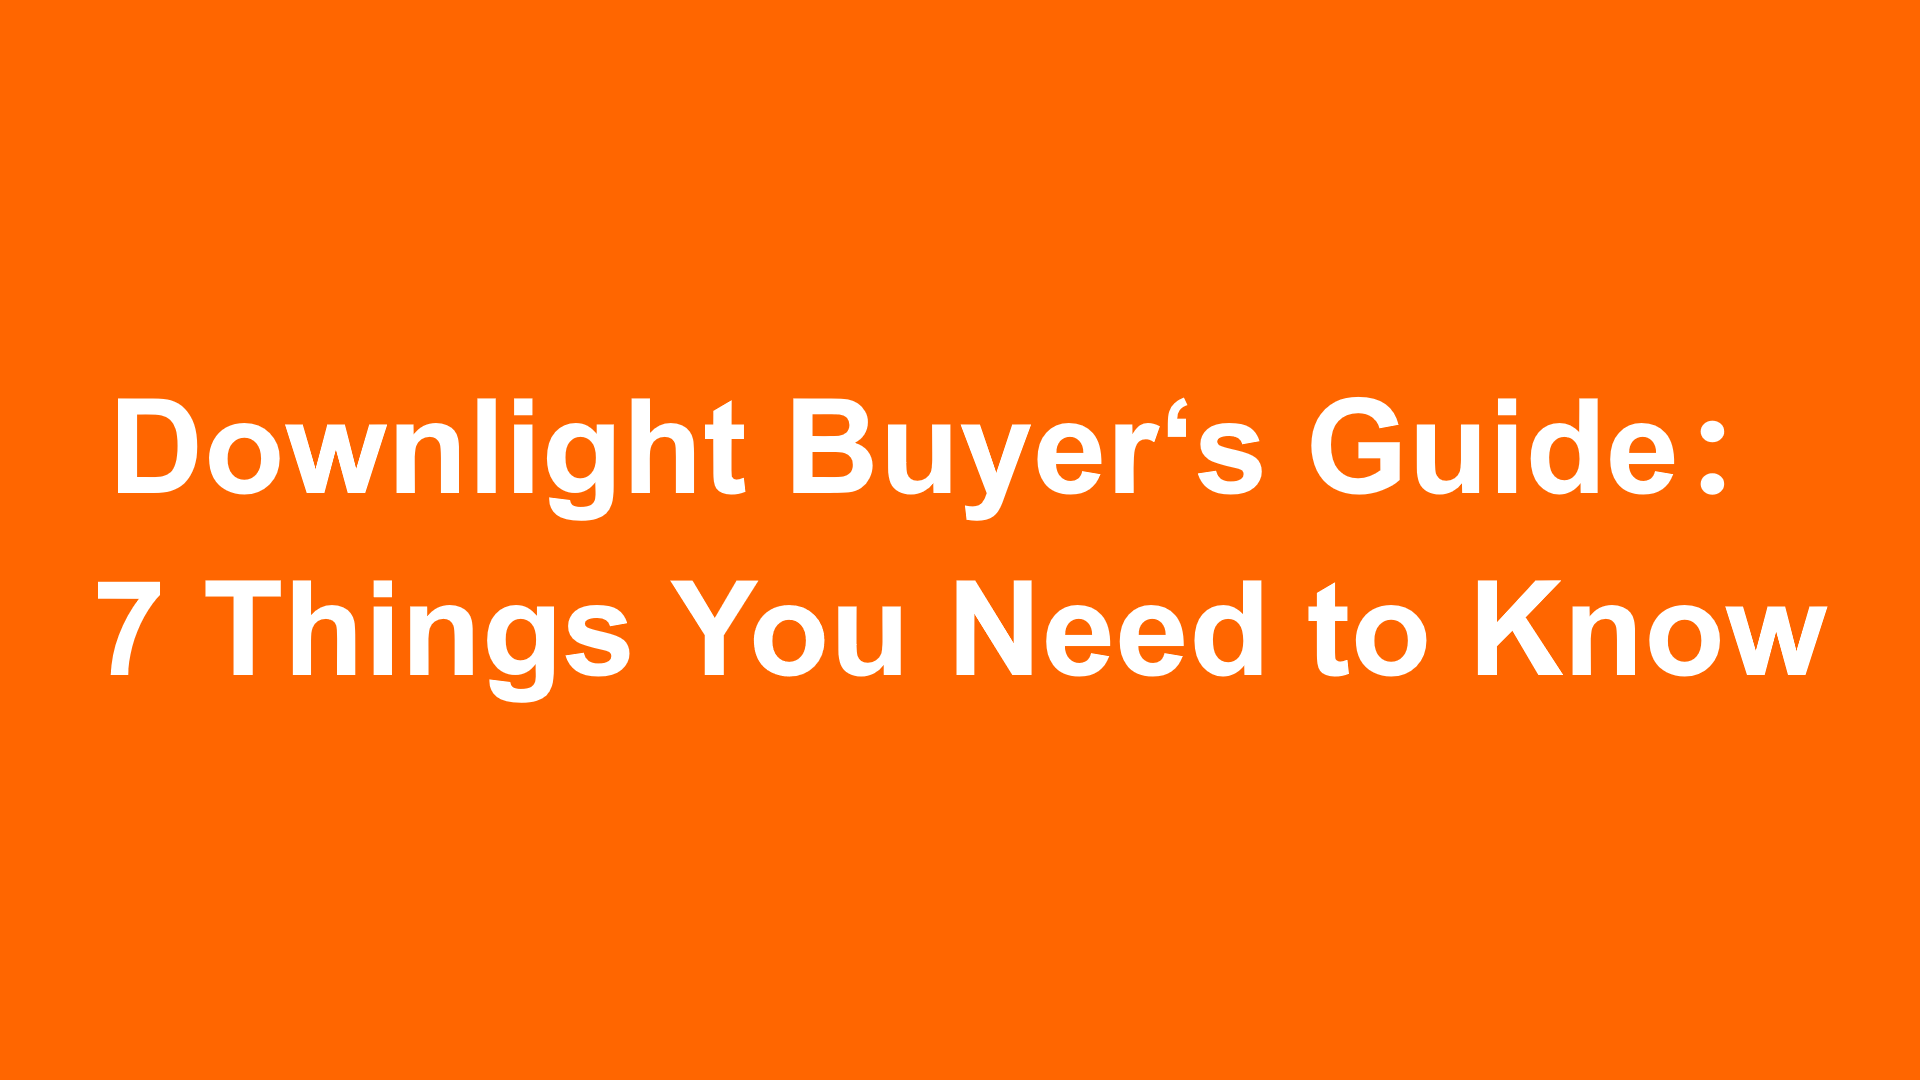 Downlight Buyers Guide: 7 Things You Need to Know